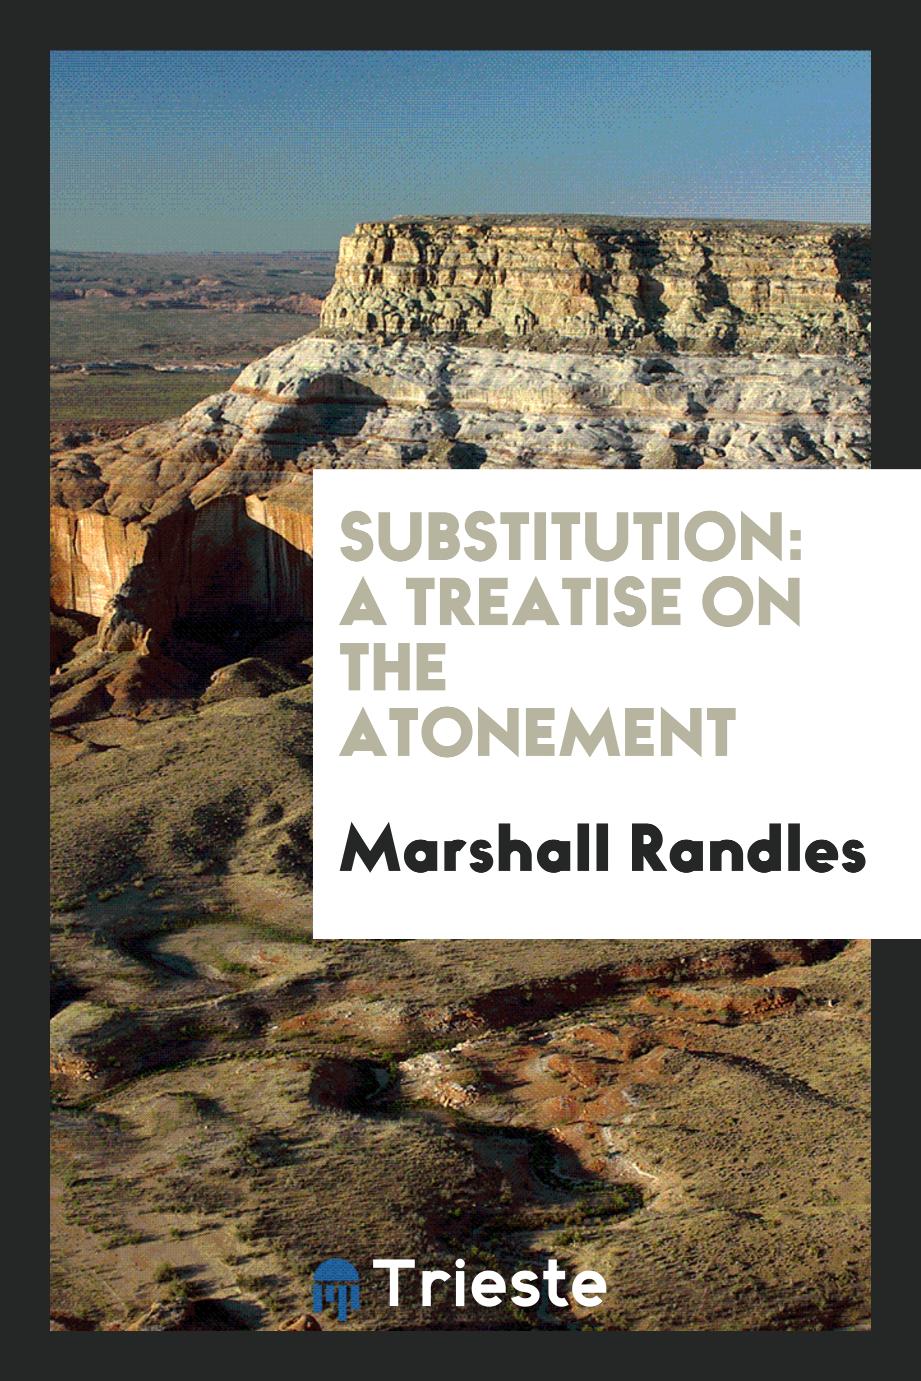 Substitution: a treatise on the atonement